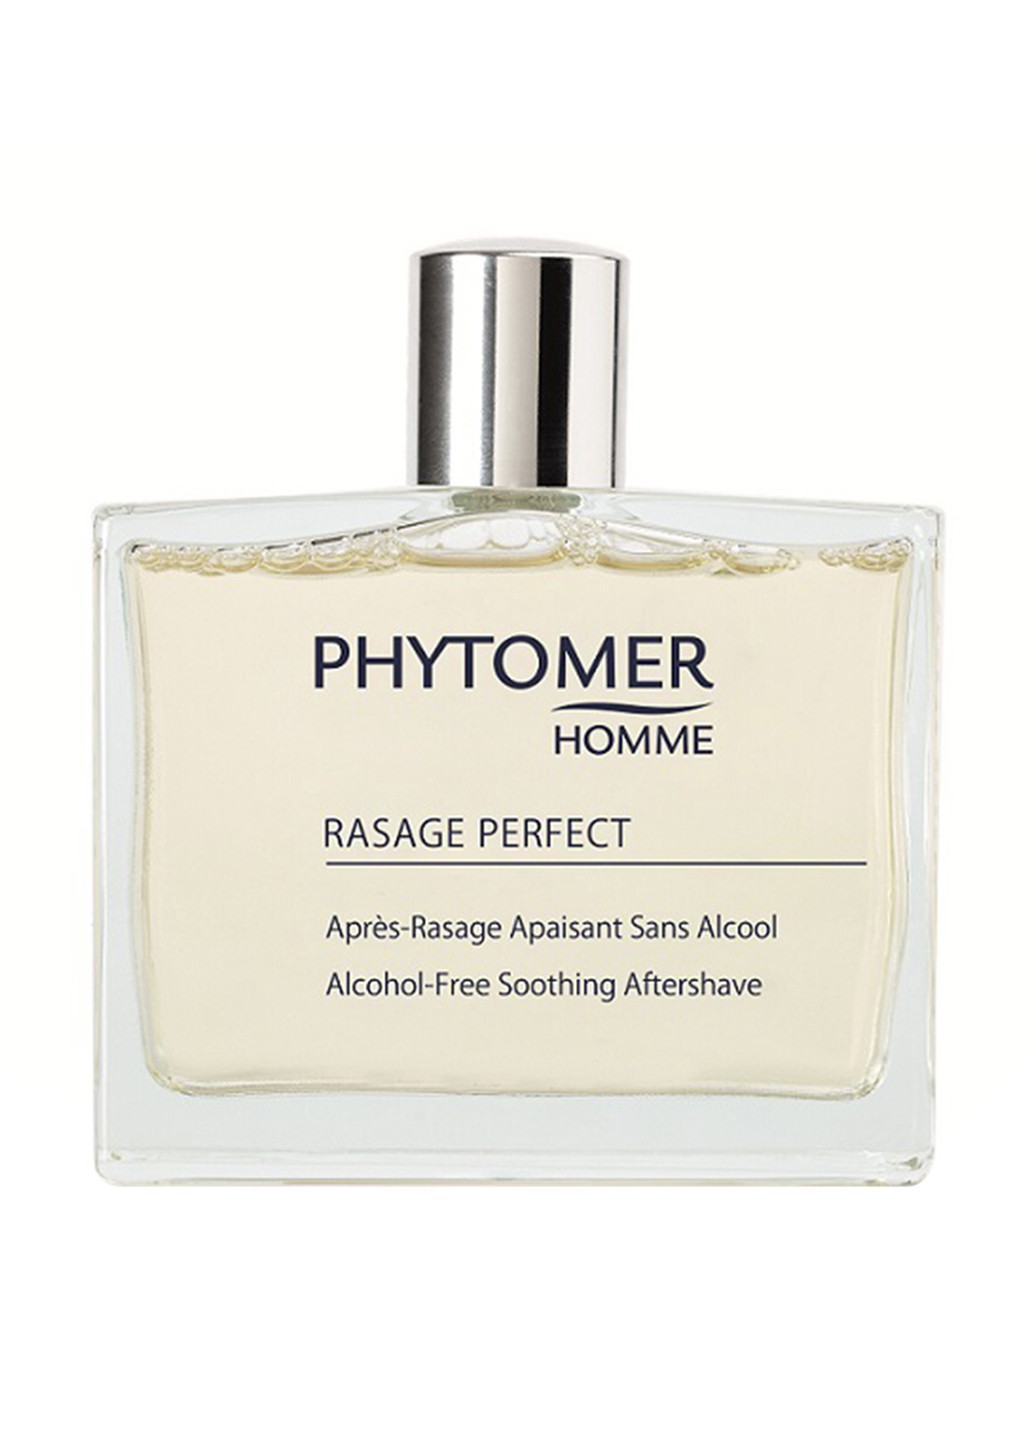 Лосьон после бритья Homme Rasage Perfect Soothing Aftershave, 100 мл Phytomer (89111781)